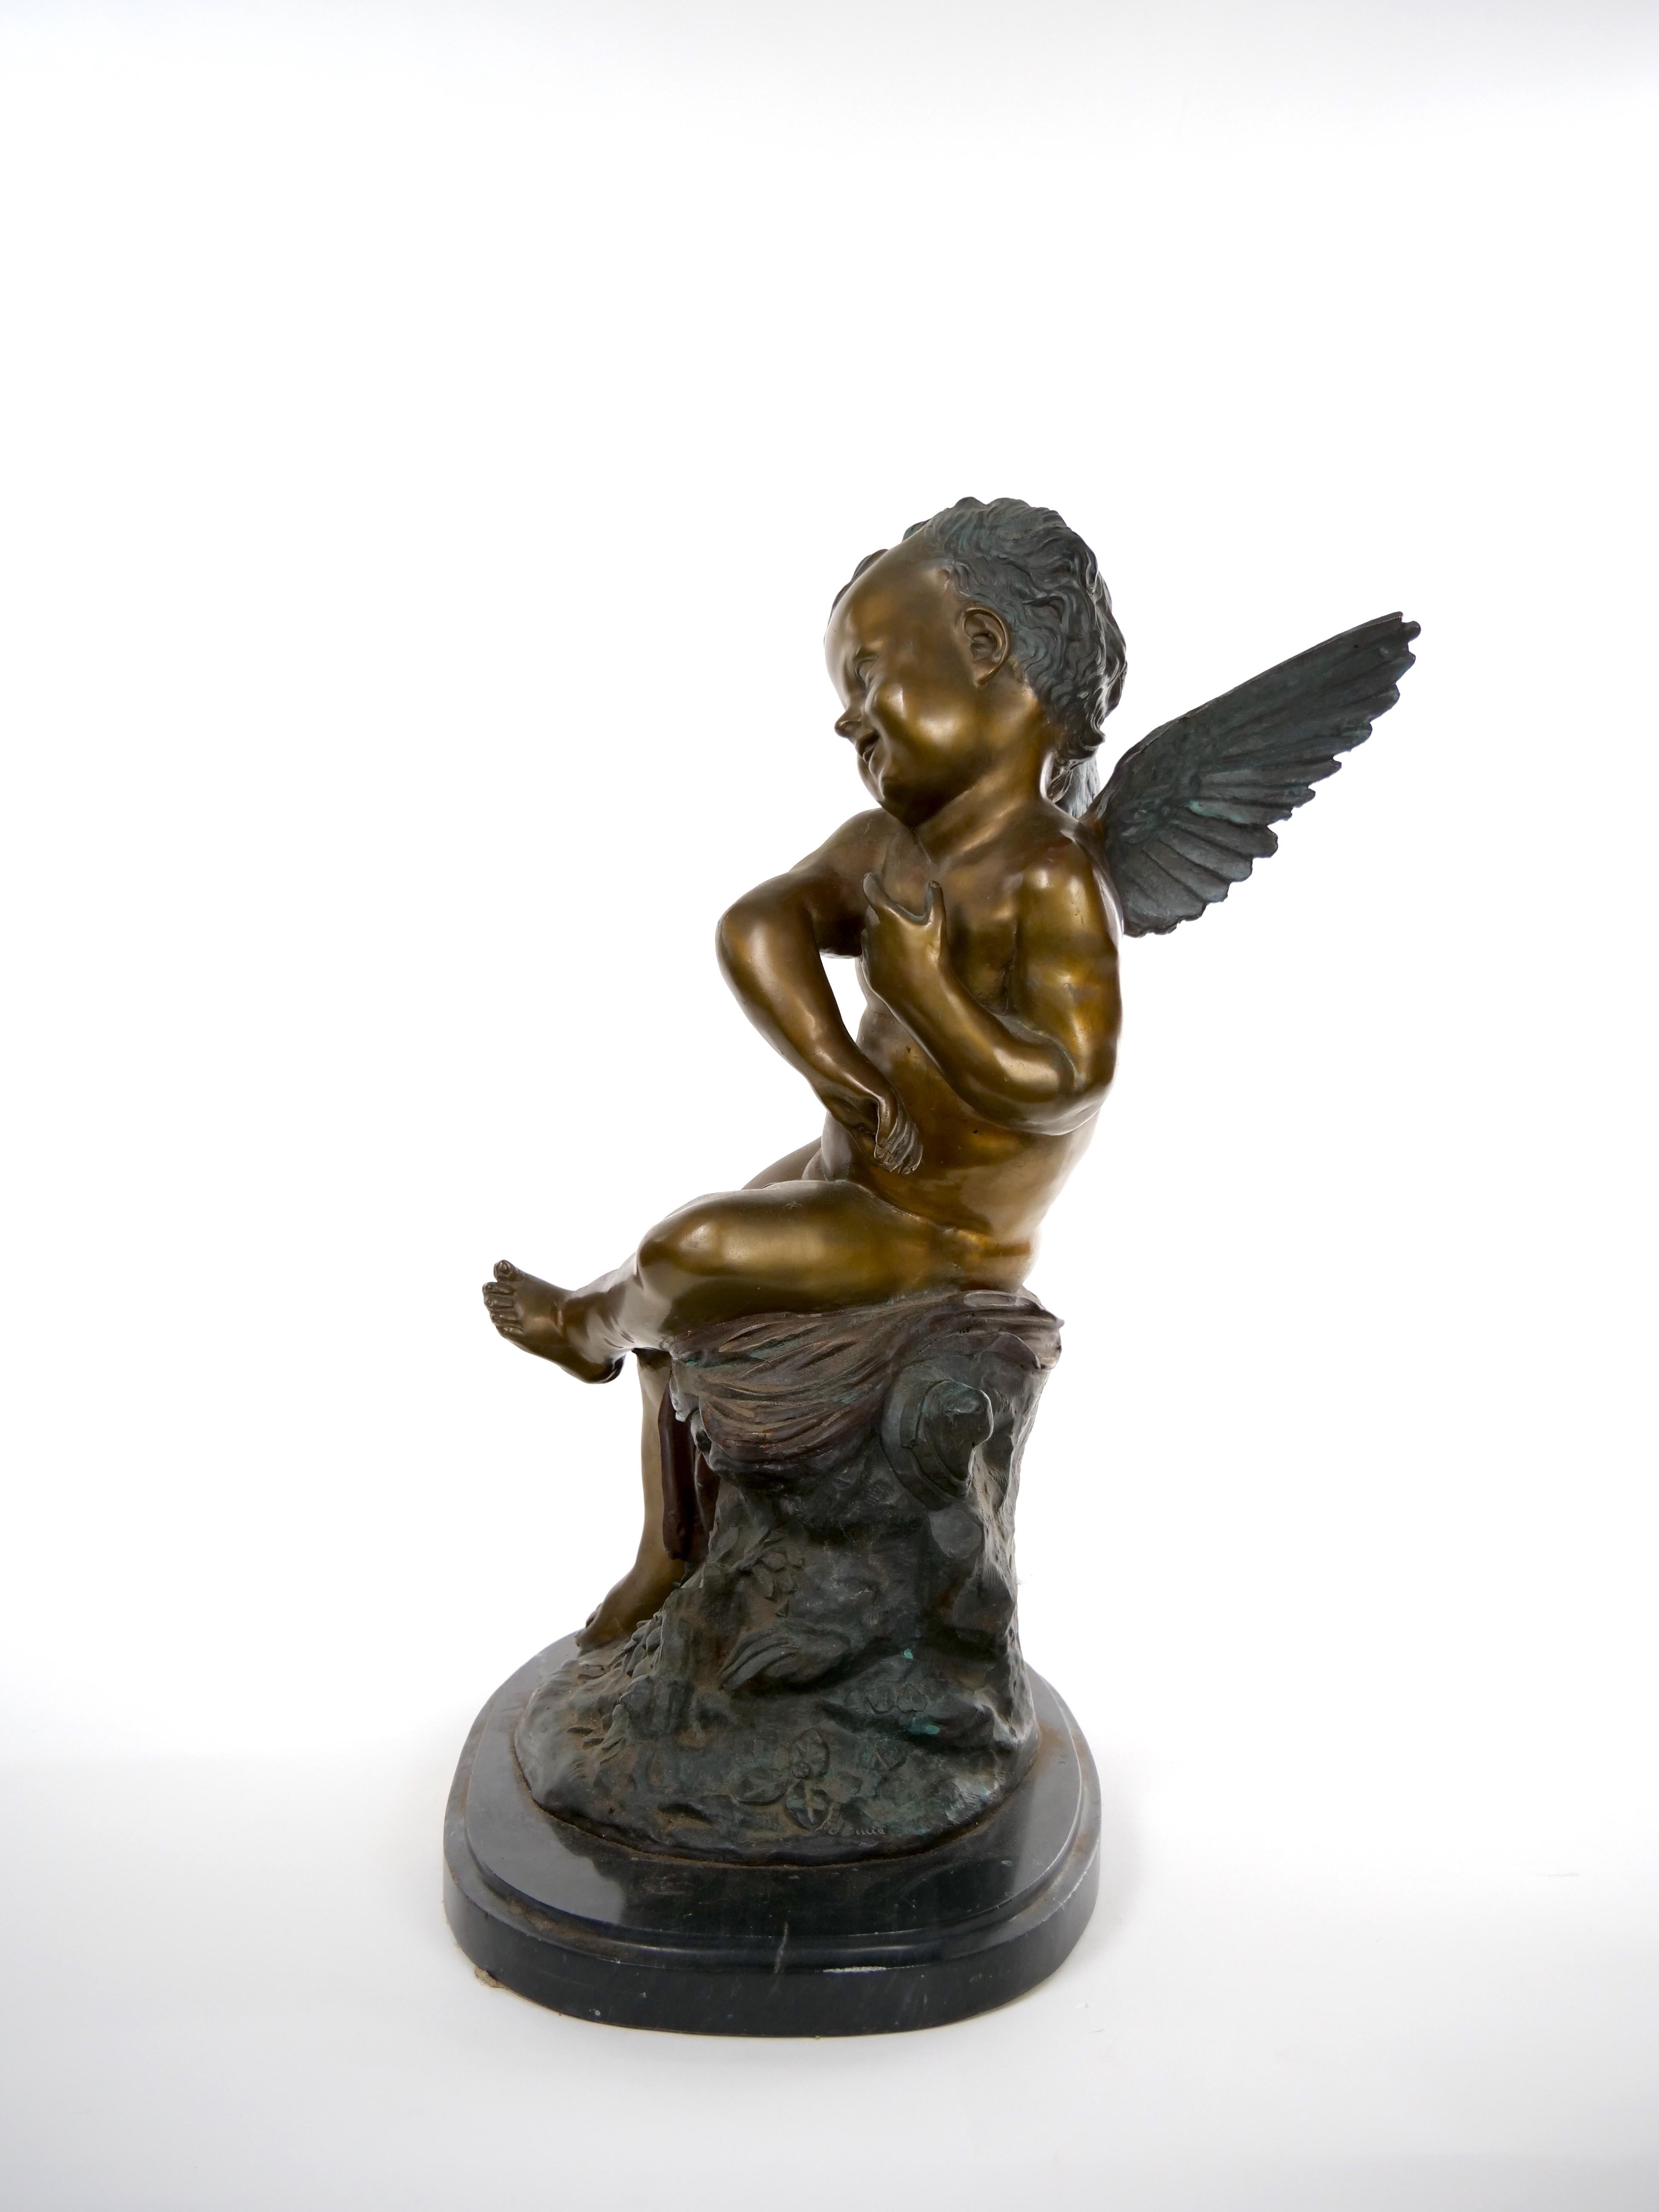 Late 19th century well executed large patinated bronze figural sculpture of a seated cupid / winged putti resting of an oval marble base. The piece is in great condition. Minor wear and small chip to the marble base. It measures 20 inches tall